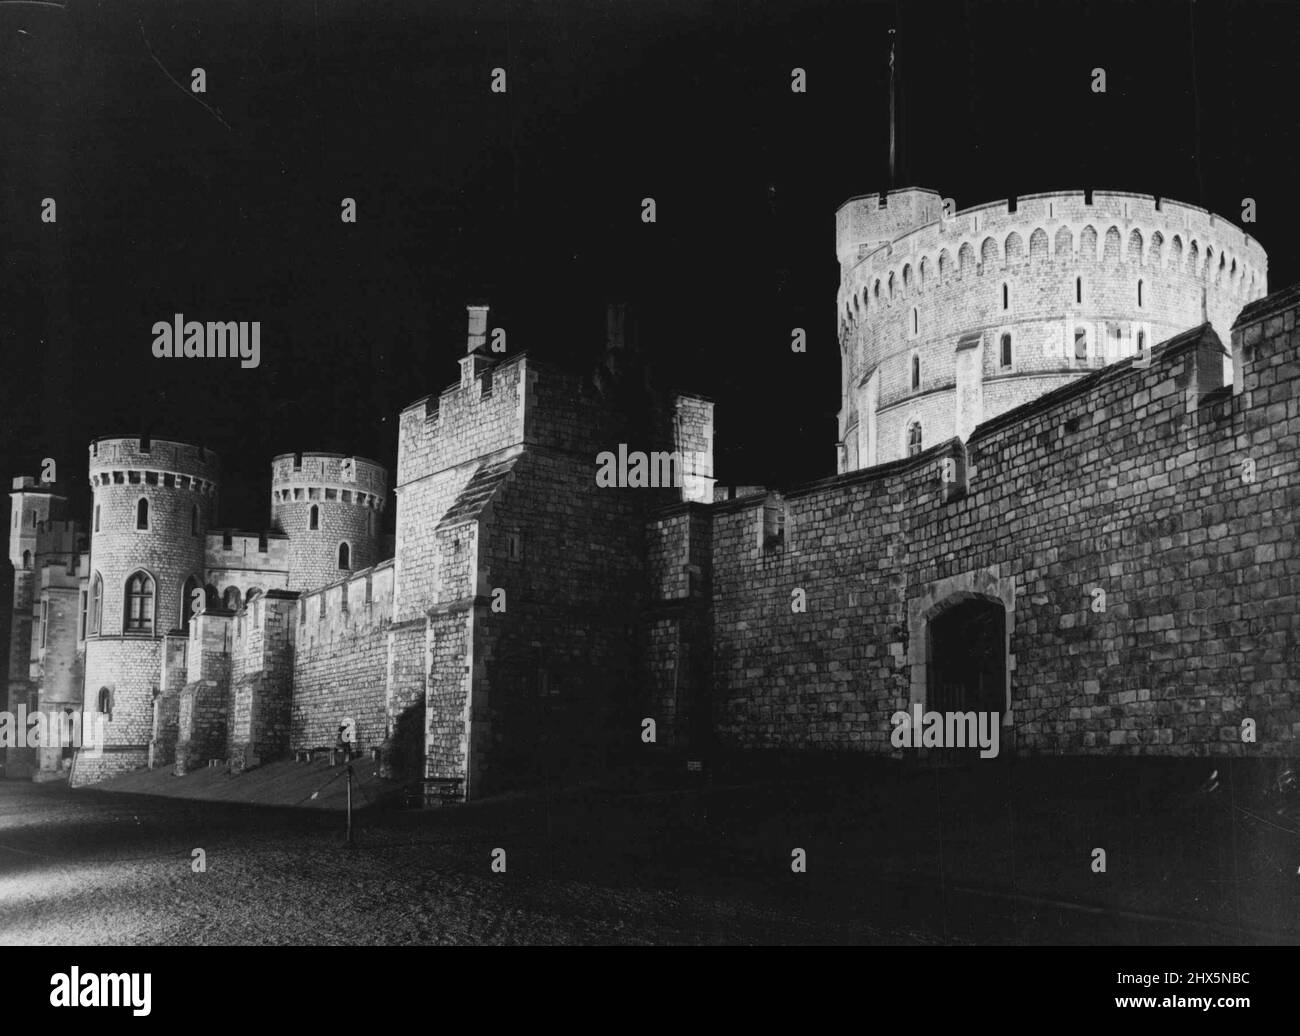 Windsor Castle By Floodlight -- Historic Windsor Castle makes an impressive picture with shadows cast on the walls and turrets during a floodlighting test for the Festival of Britain. April 30, 1951. Stock Photo